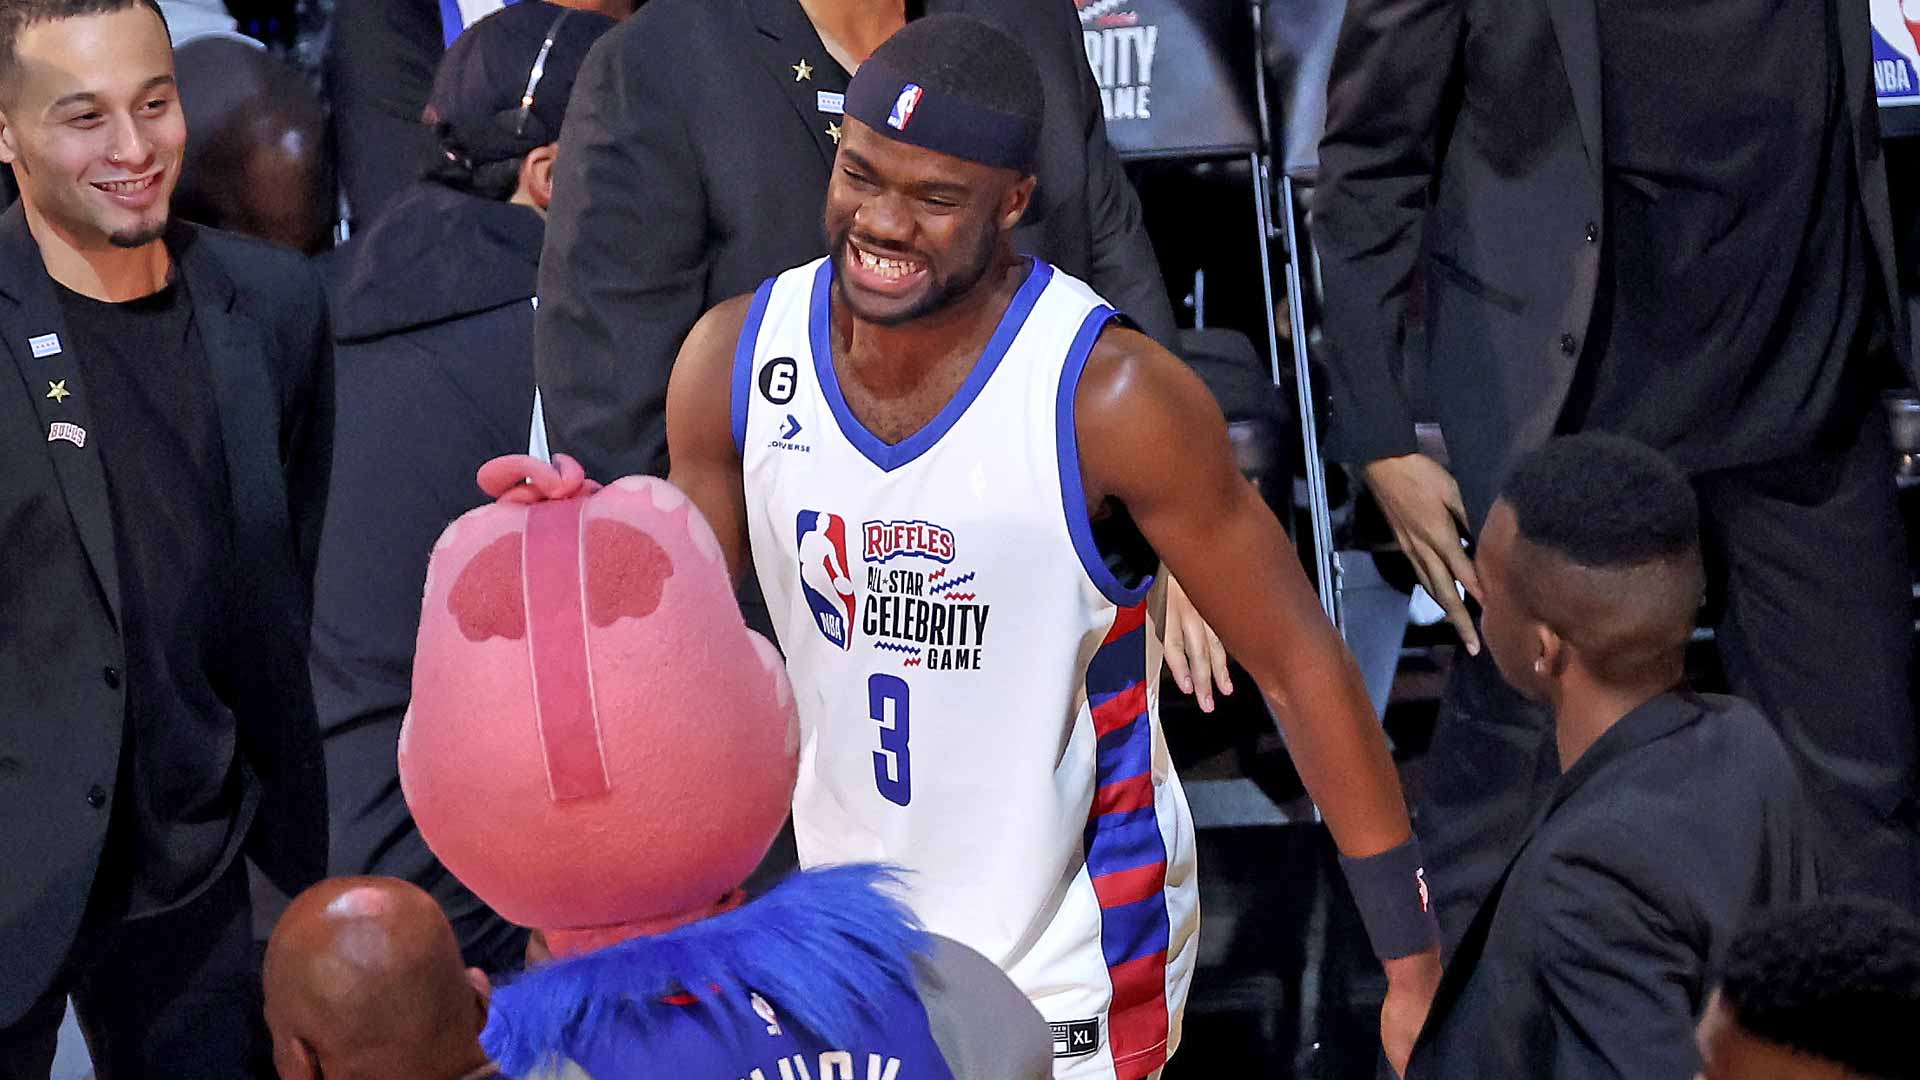 Frances Tiafoe is introduced at the NBA All-Star Celebrity Game.